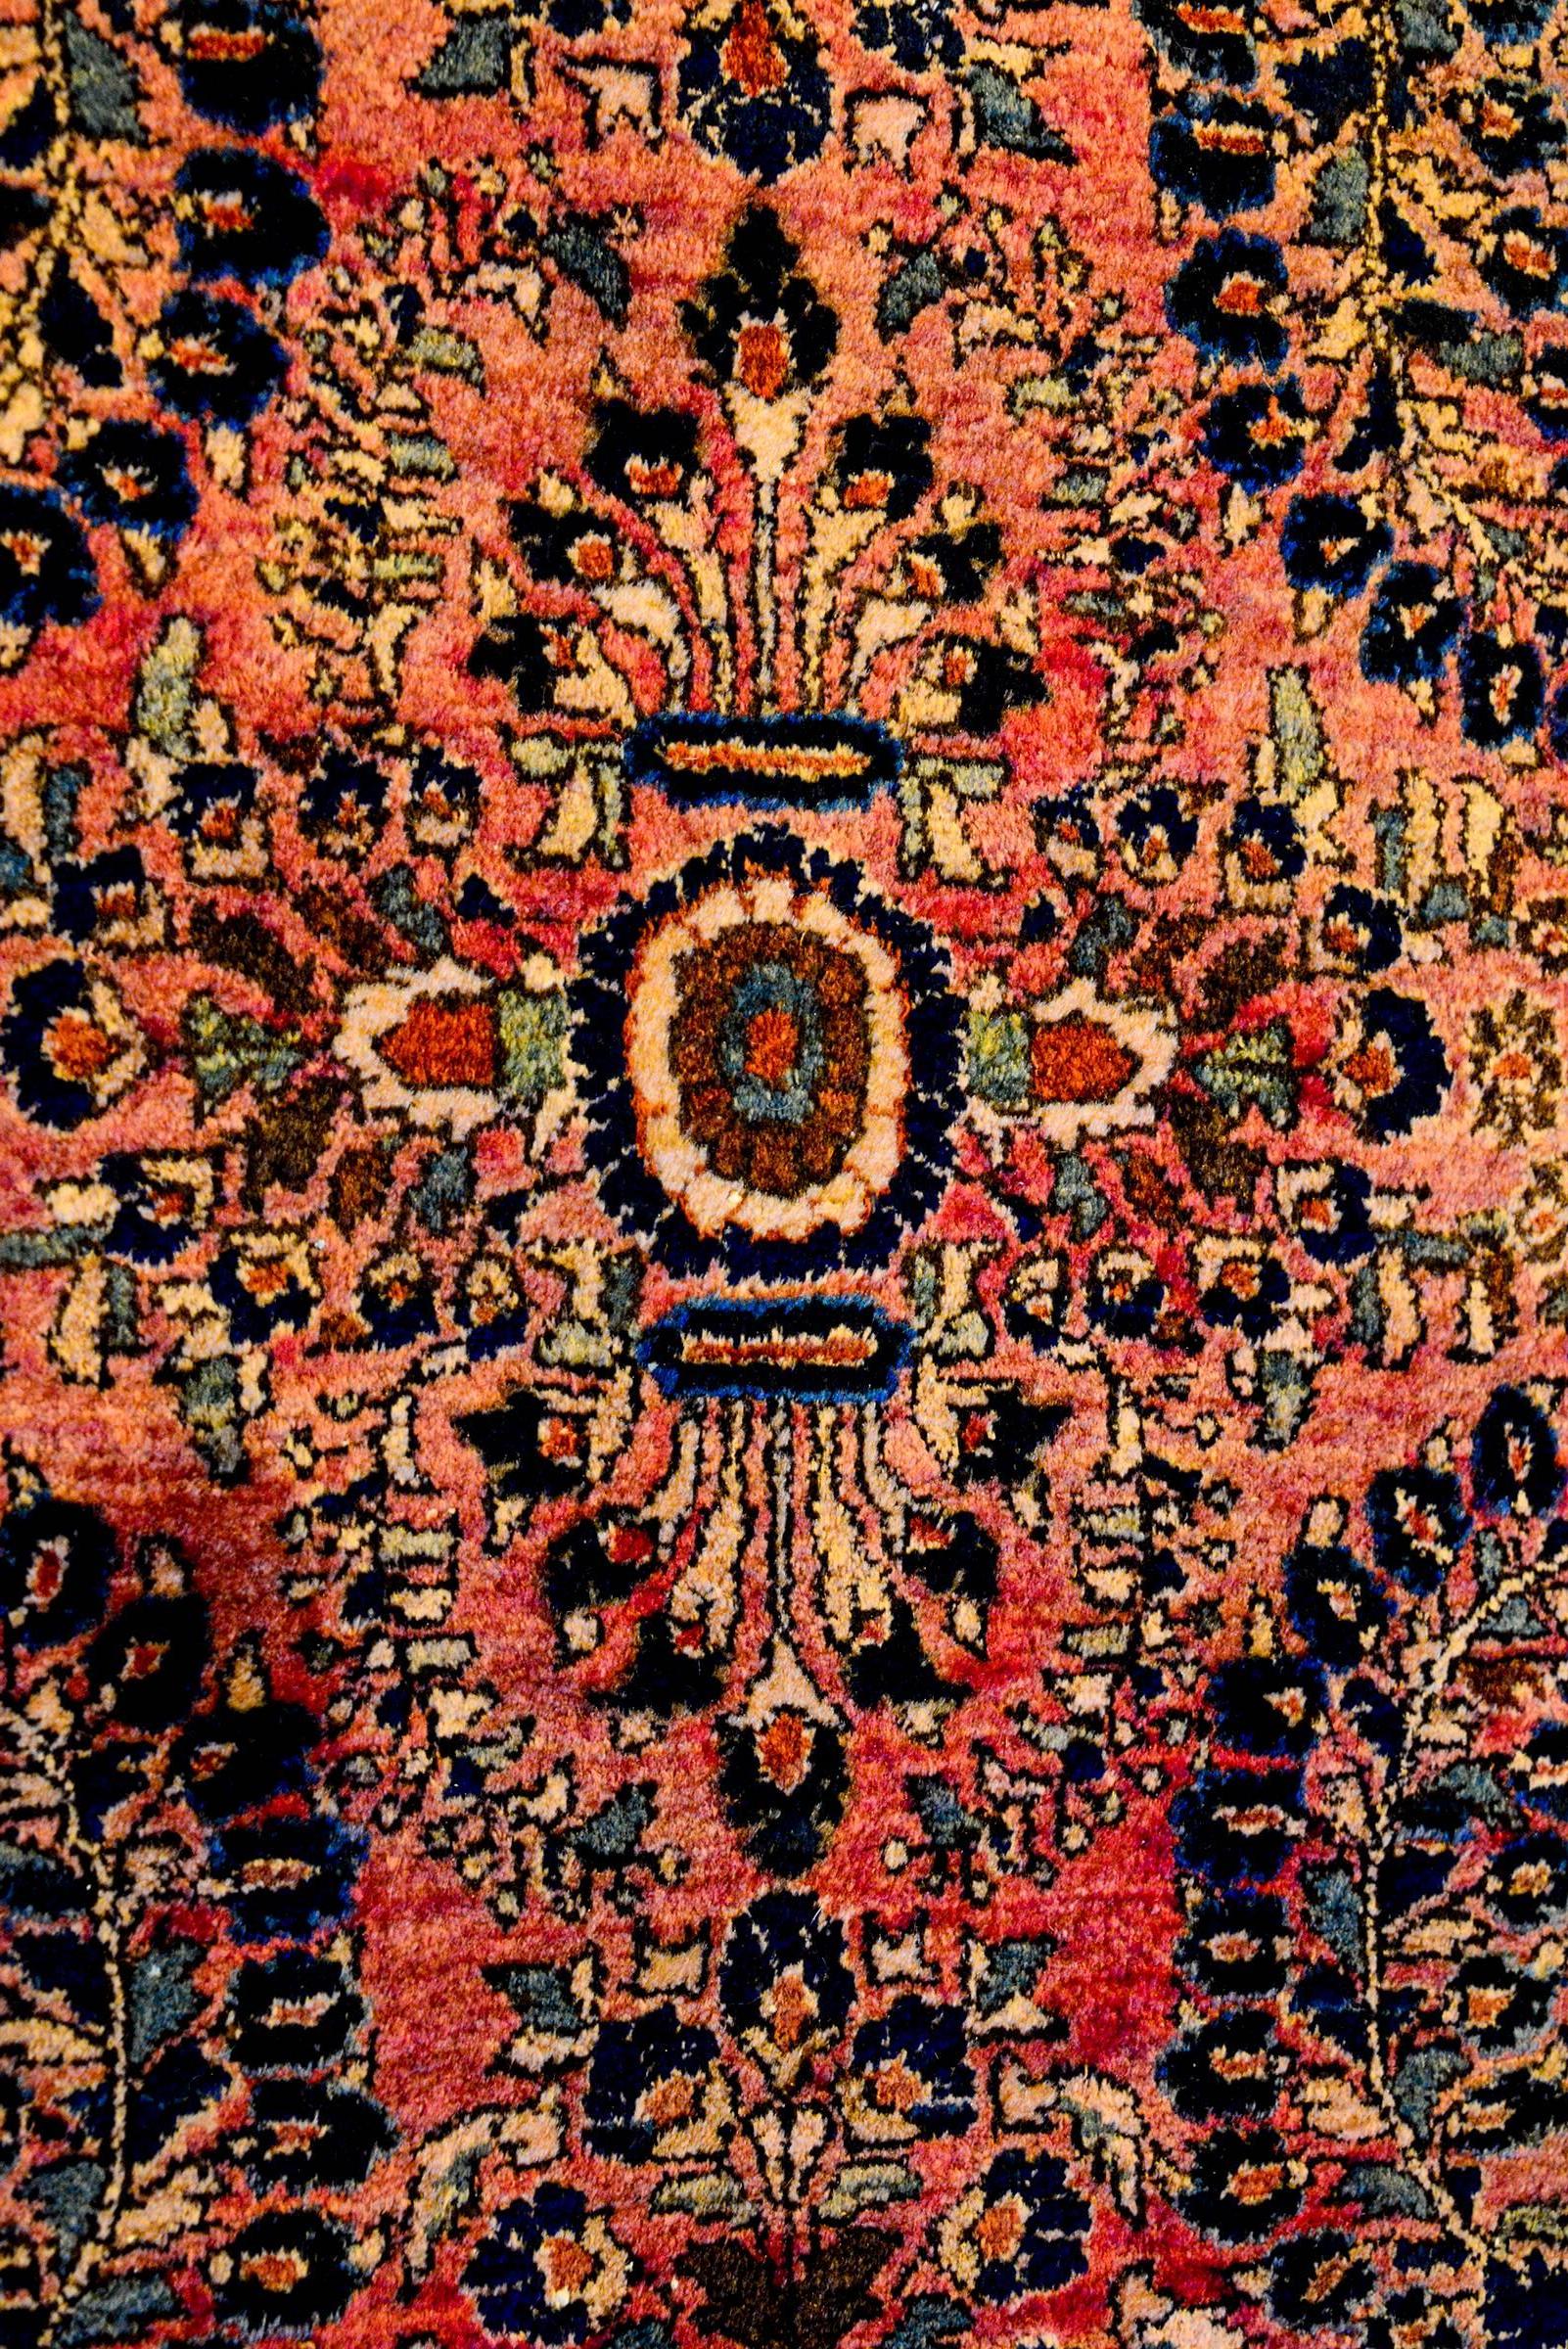 A beautifully woven early 20th century Persian Sarouk rug with a traditional all-over mirror floral pattern woven in light and dark indigo, and cream vegetable dyed wool, on a fantastic abrash cranberry background. The border is thin, with a floral